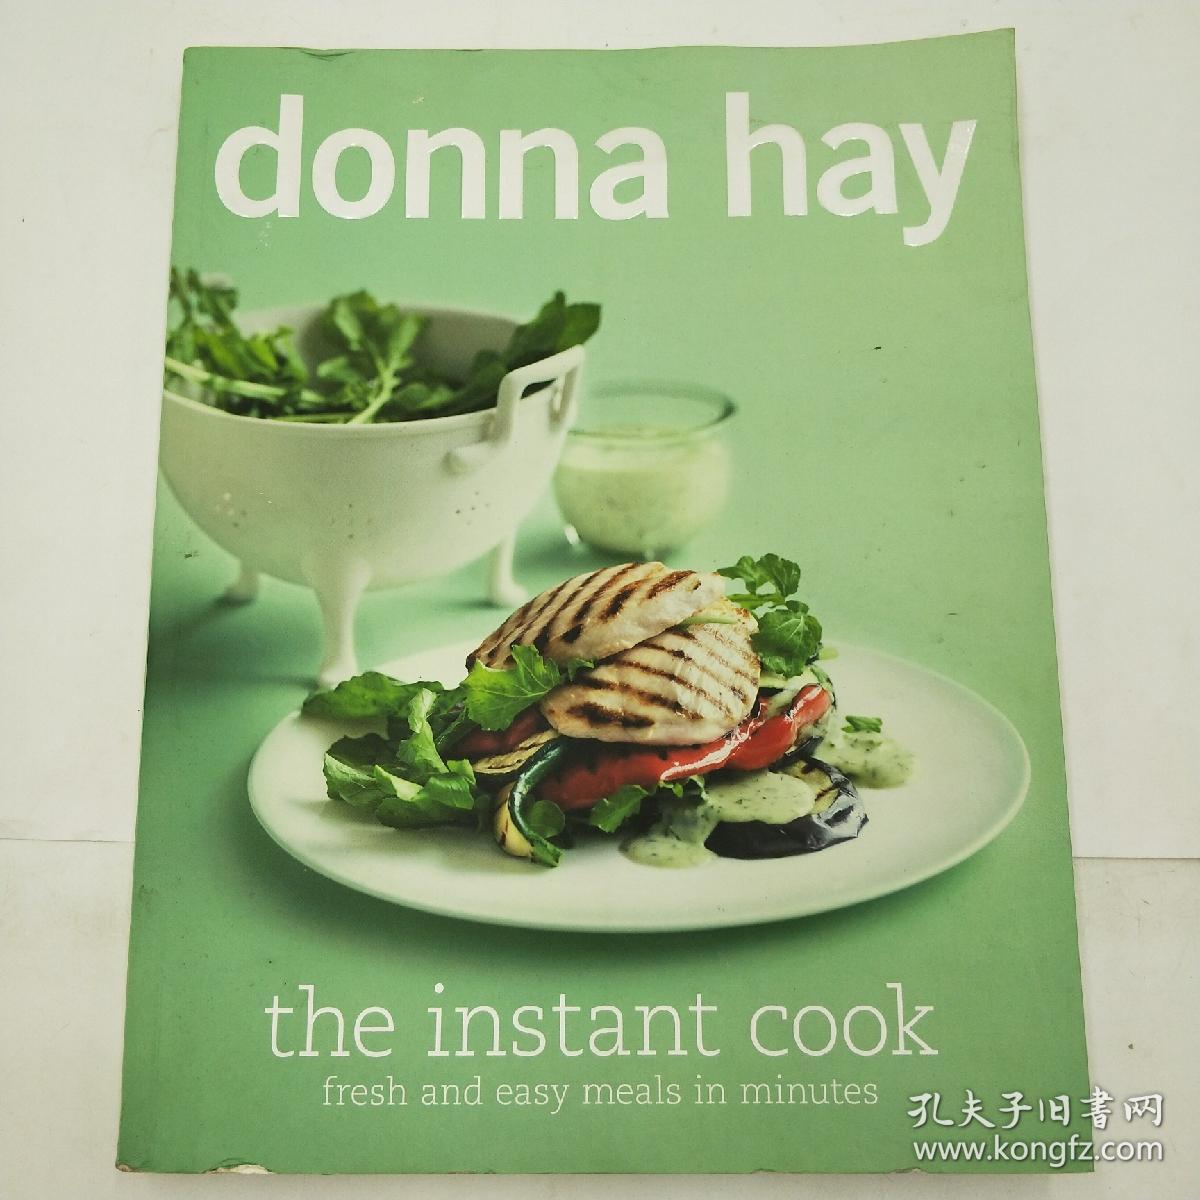 The Instant Cook: Fresh and Easy Meals in Minutes